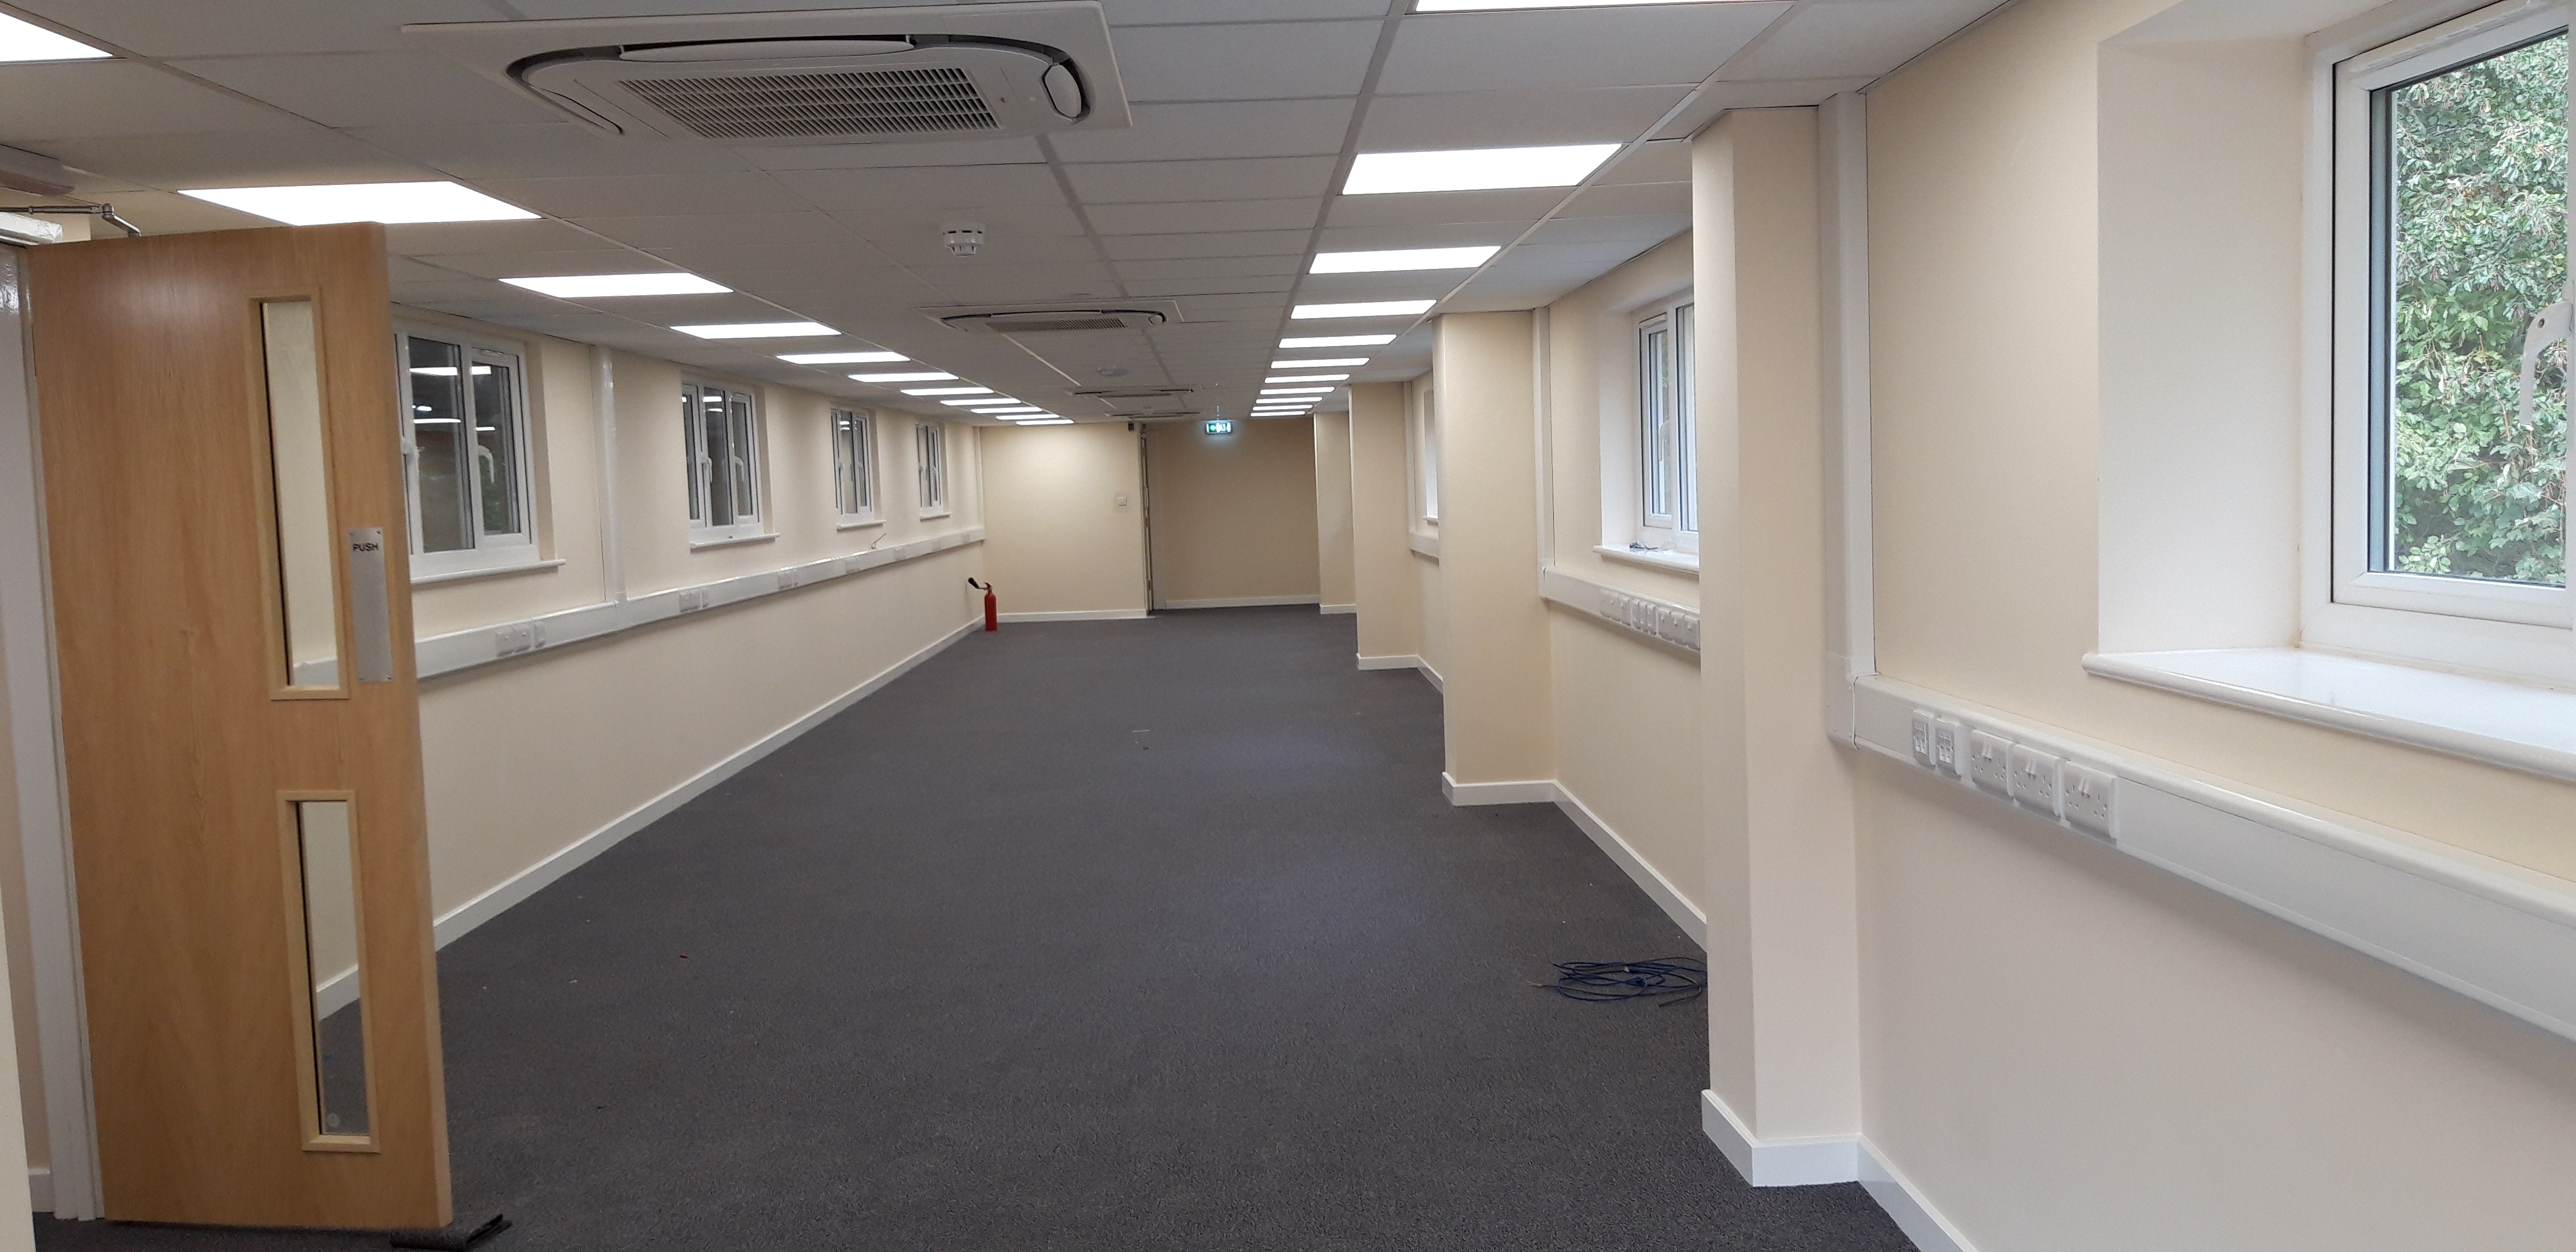 commercial electrical work in bristol